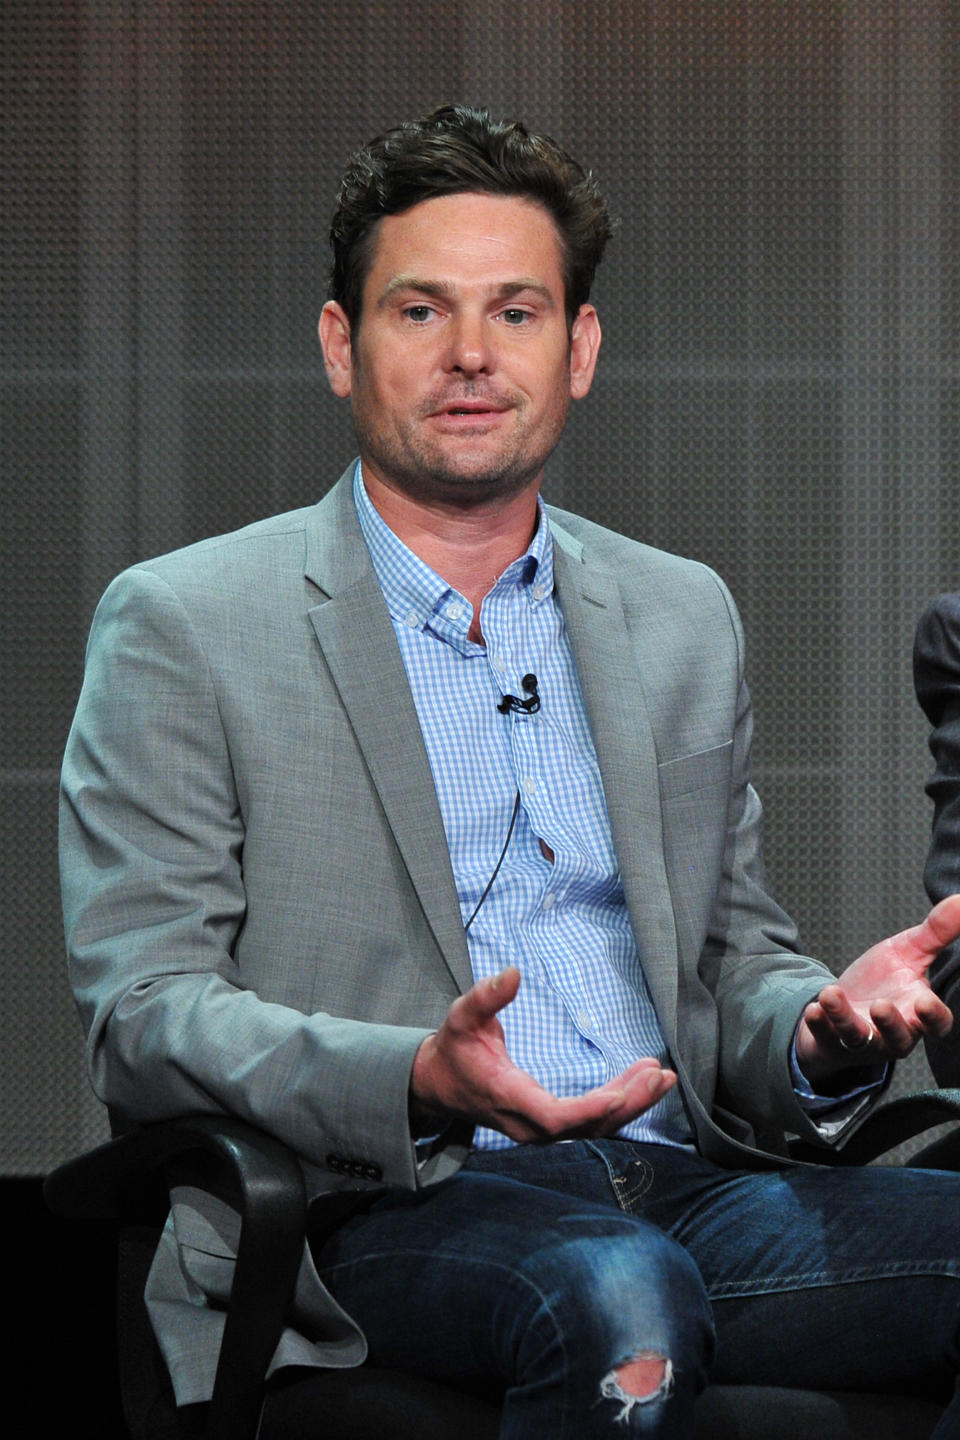 Actor Henry Thomas attends the Disney/ABC Television Group's 2013 Summer TCA panel at the Beverly Hilton Hotel on Sunday, August 4, 2013 in Beverly Hills, Calif. (Photo by Vince Bucci/Invision/AP)